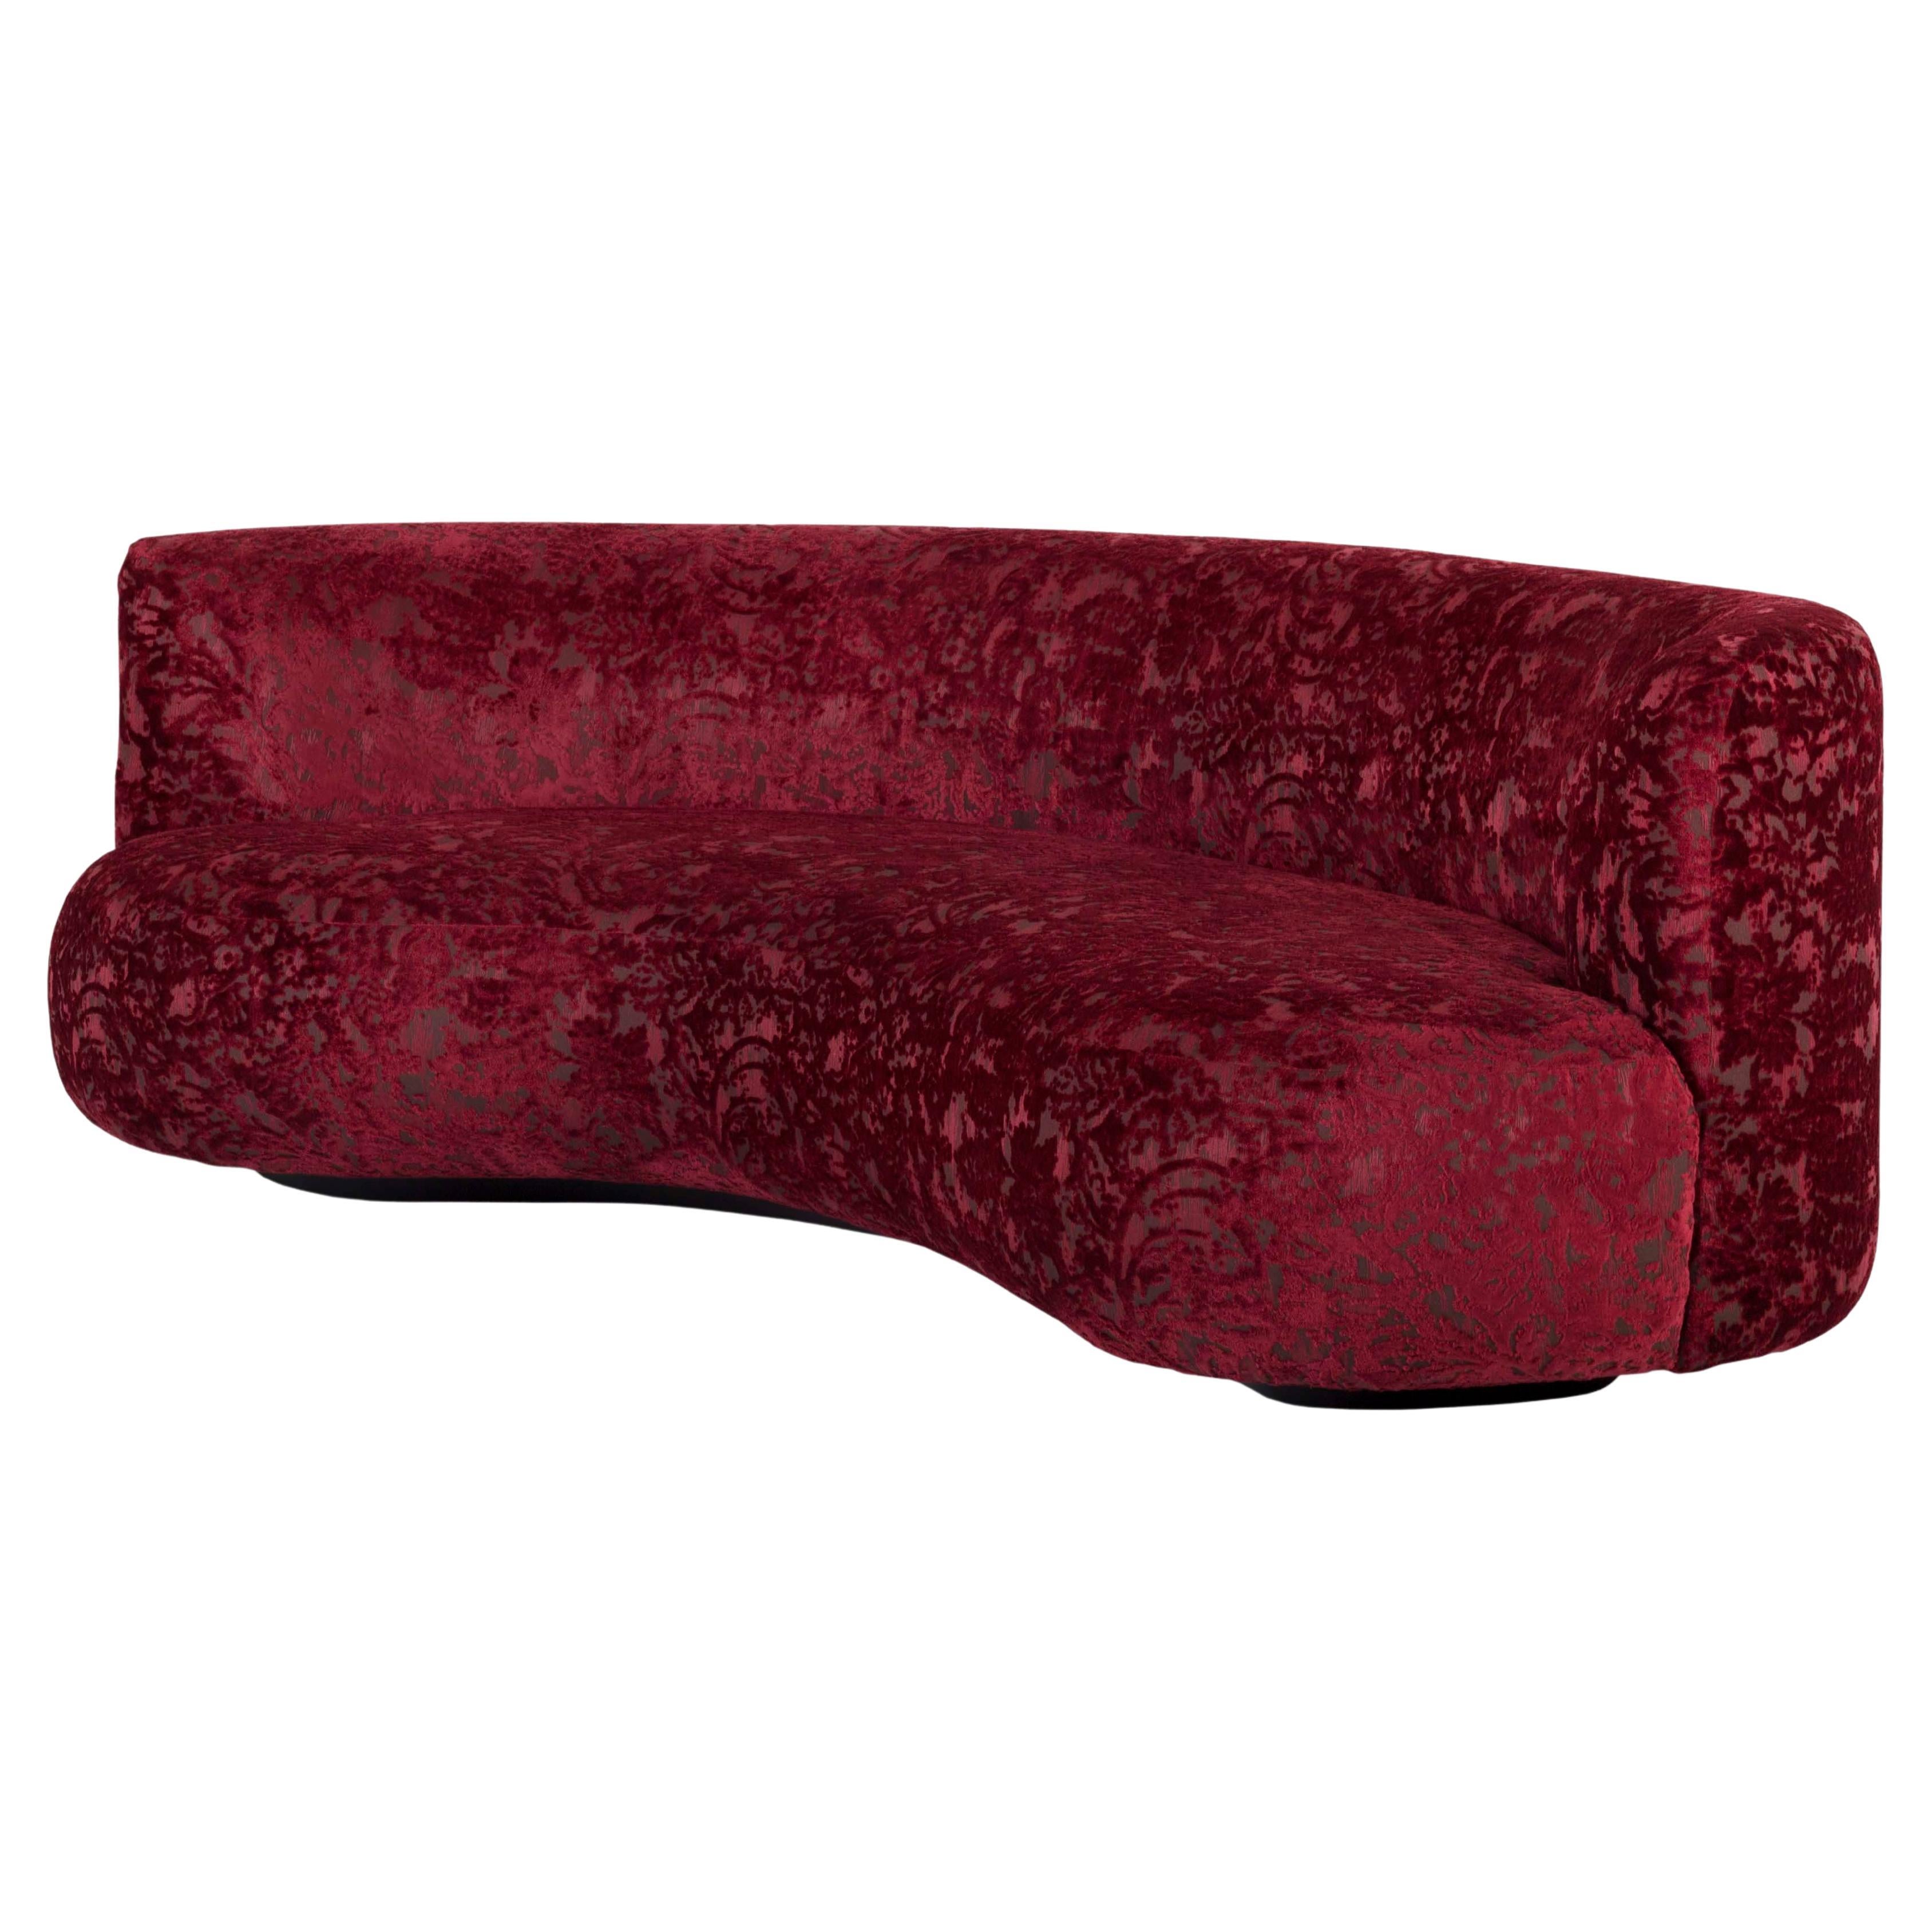 Modern Twins 3-Seat Sofa in Jacquard-Patterned Velvet Handcrafted by Greenapple